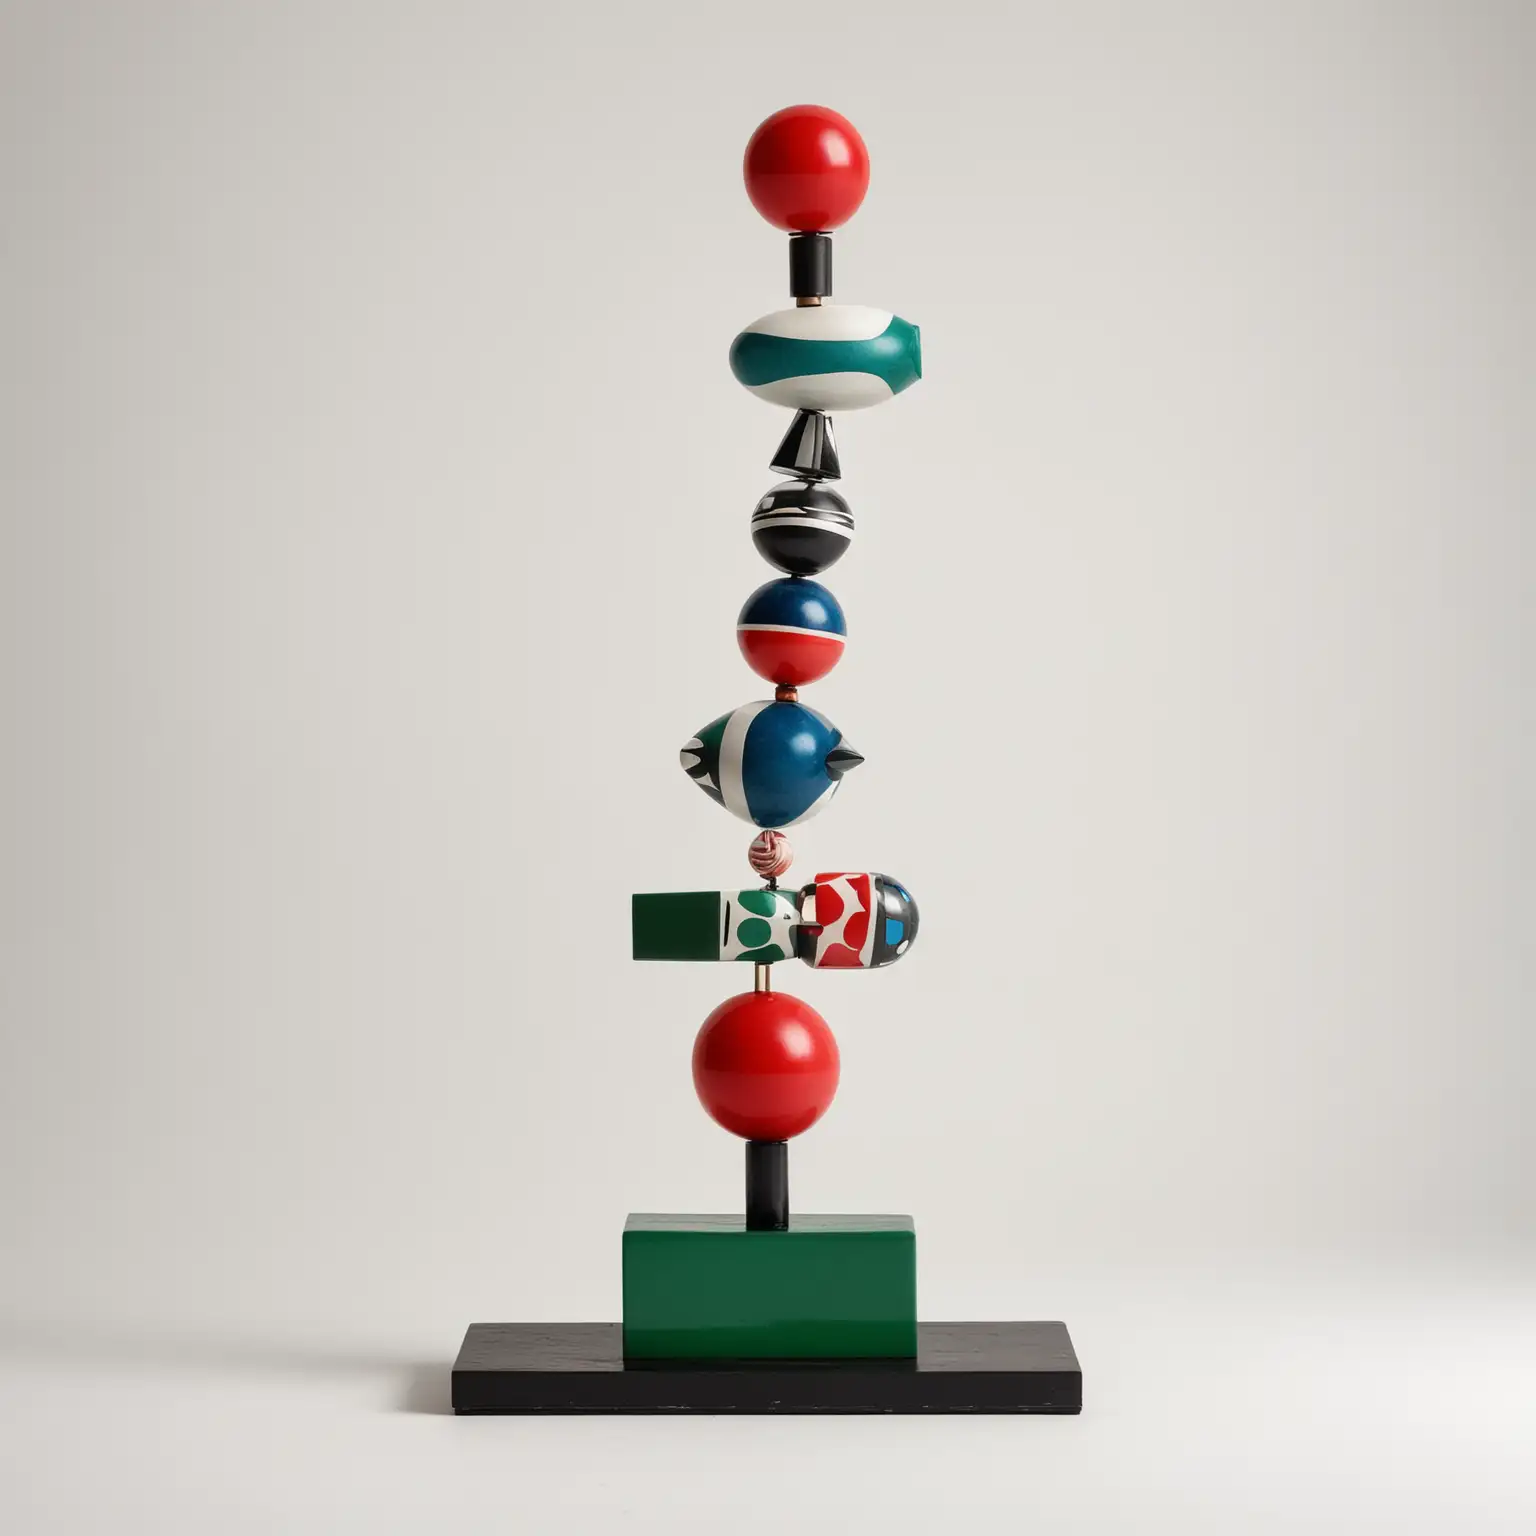 abstract minimalist totem balance sculpture consist of  5 different parts of different shapes and patterns, big and small parts, color green, red, black, white, blue, different materials,  idea of circus, white background 